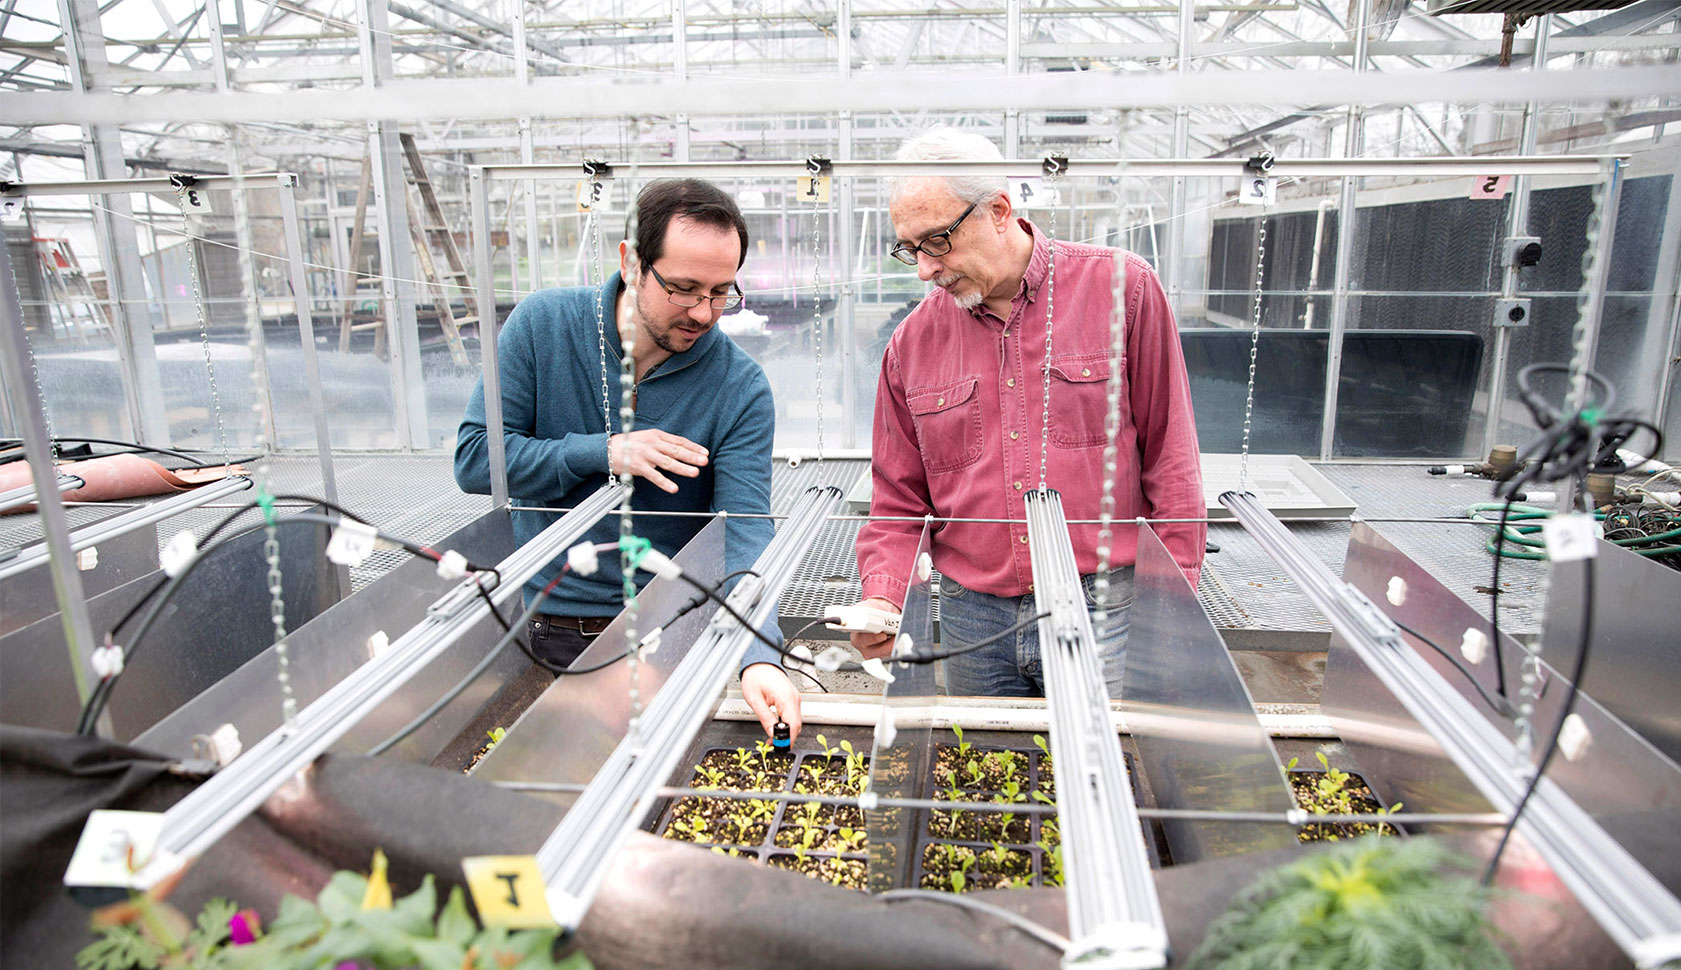 ‘Smart’ greenhouses could slash electricity costs: Horticultural lighting consumes $600 million worth of electricity every year, but a new, internet-connected greenhouse lighting system designed by researchers out of UGA’s College of Agricultural and Environmental Science could slash costs.